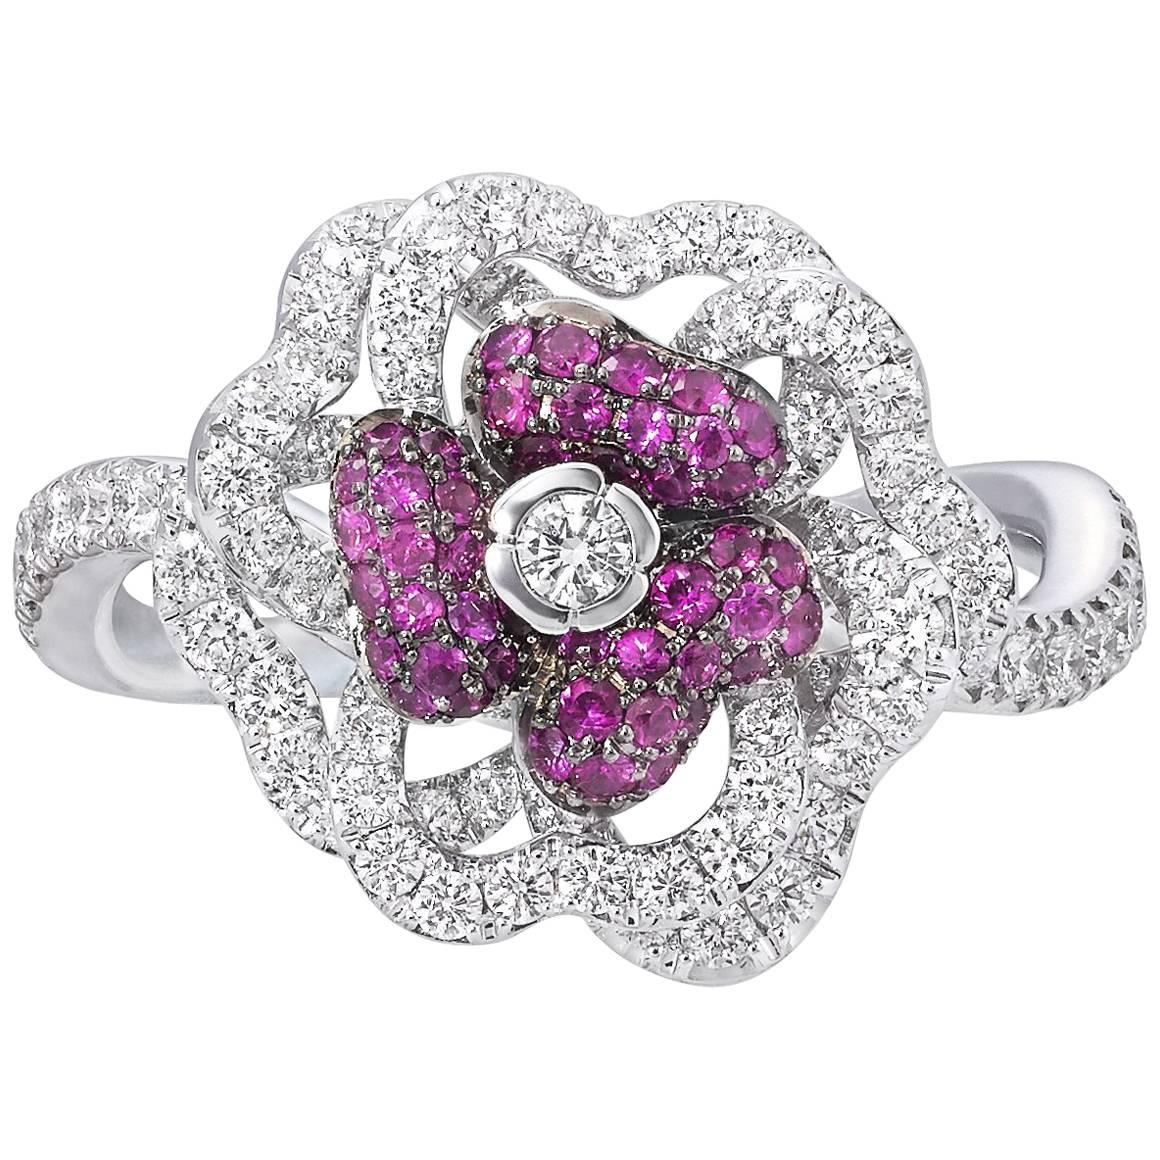 Ruby and Diamonds, White Gold Flower Ring